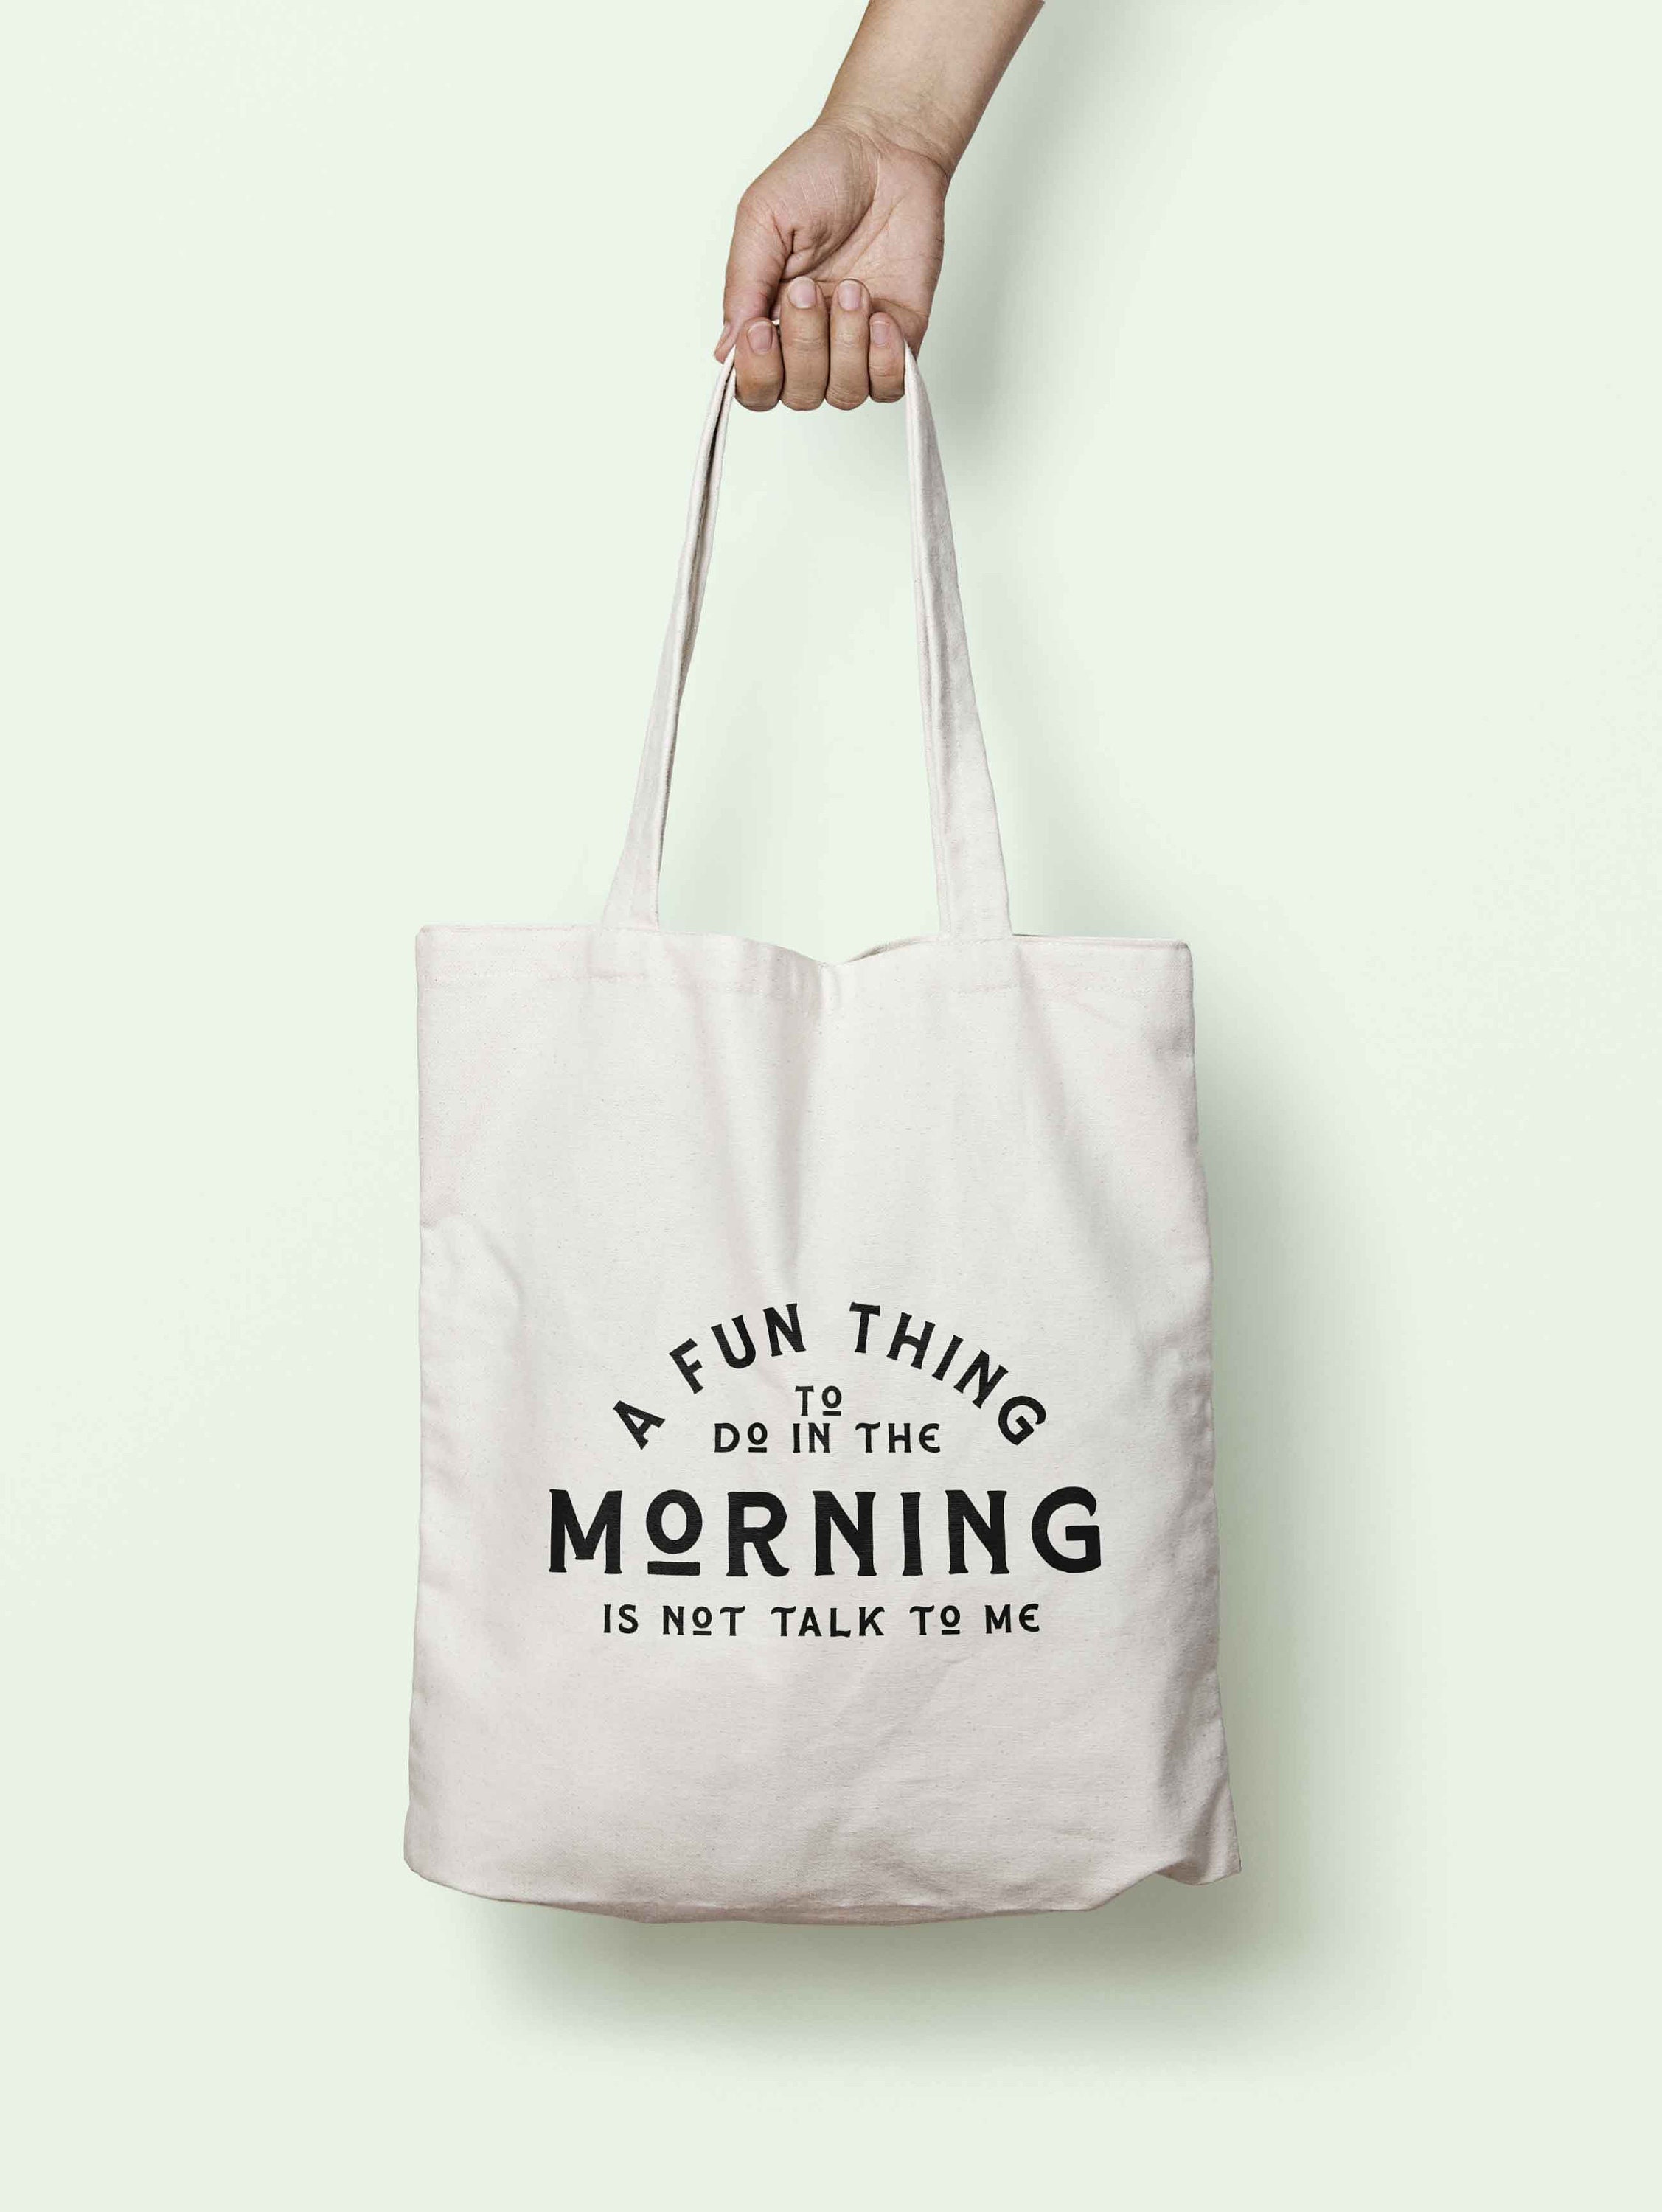 gips Kikker Bergbeklimmer A Fun Thing to Do in the Morning is Not Talk to Me Tote Bag - Etsy